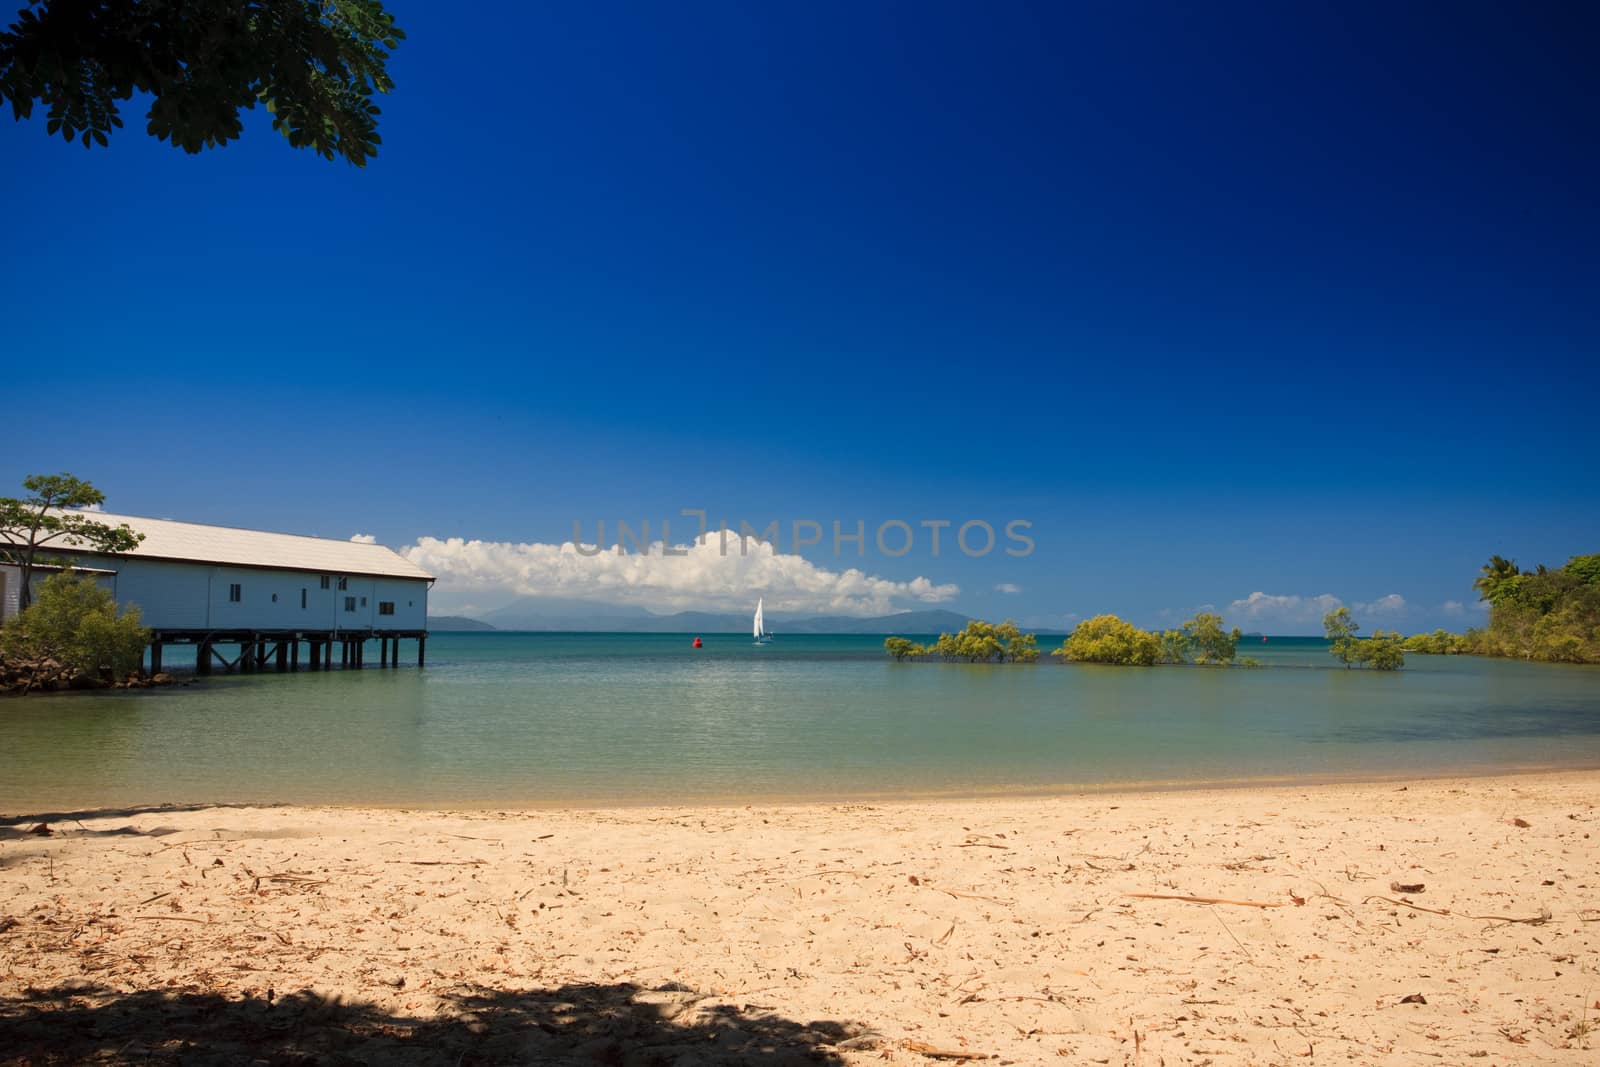 Tropical bay scenery by jrstock